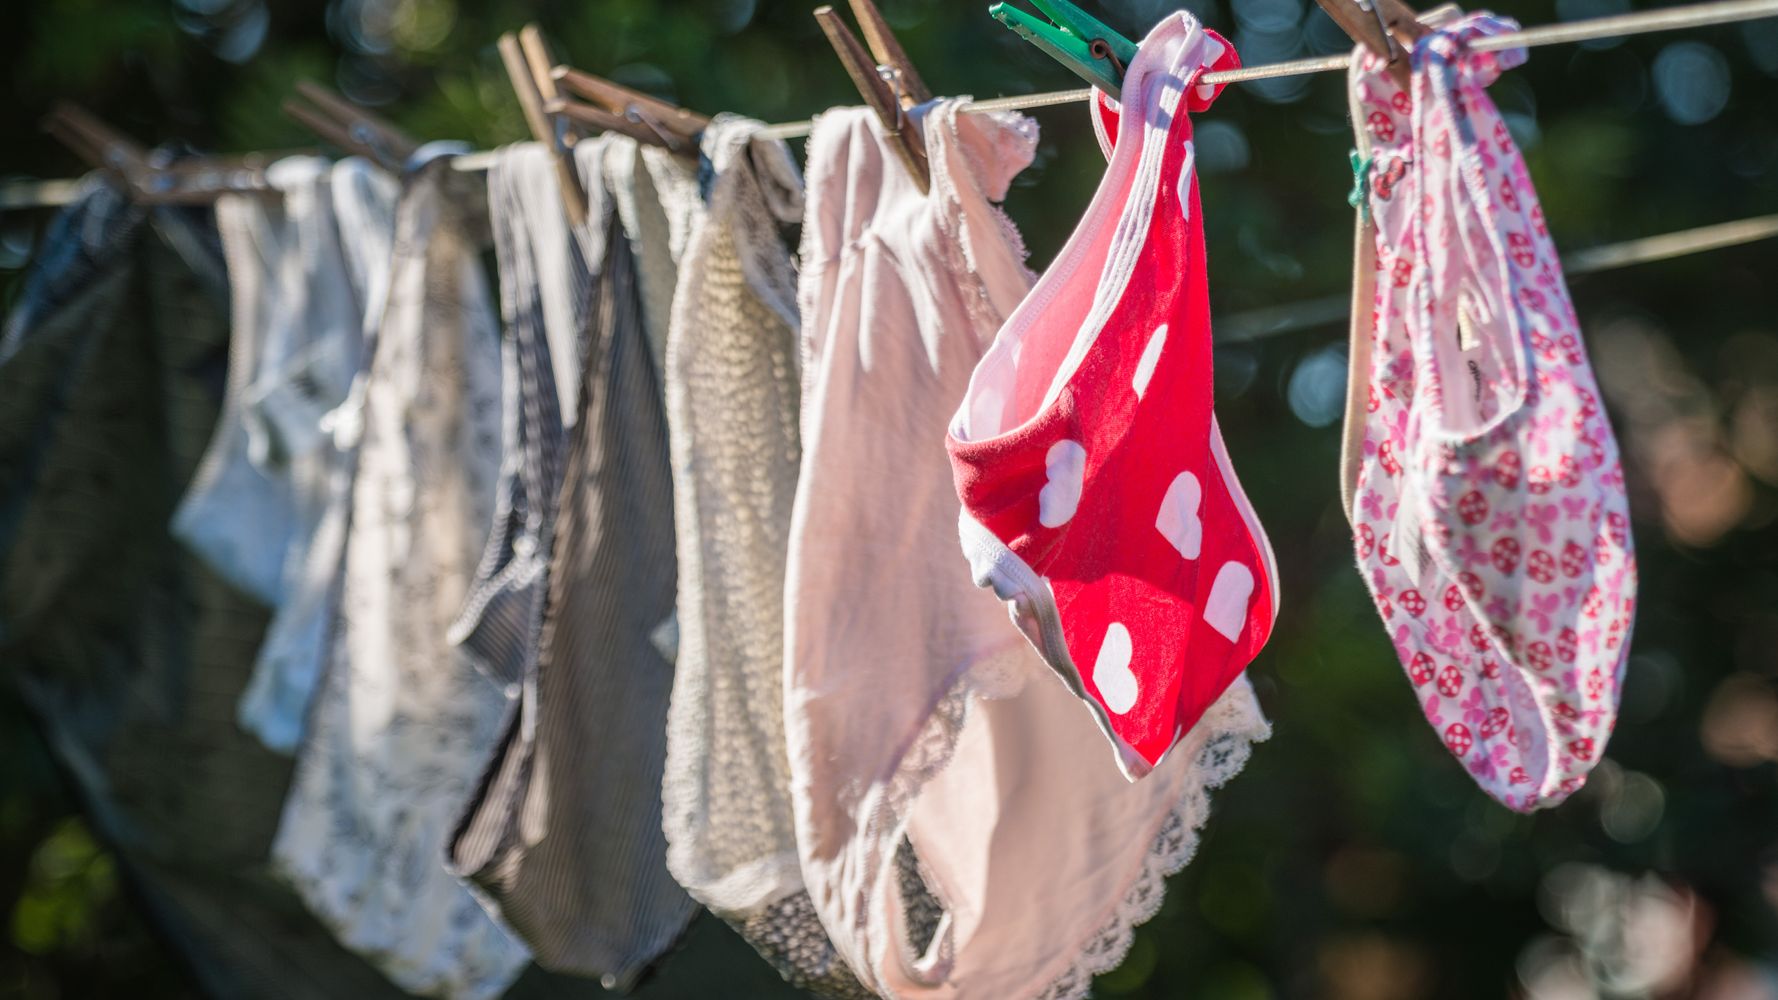 Top things you might find in your underwear and what it could mean